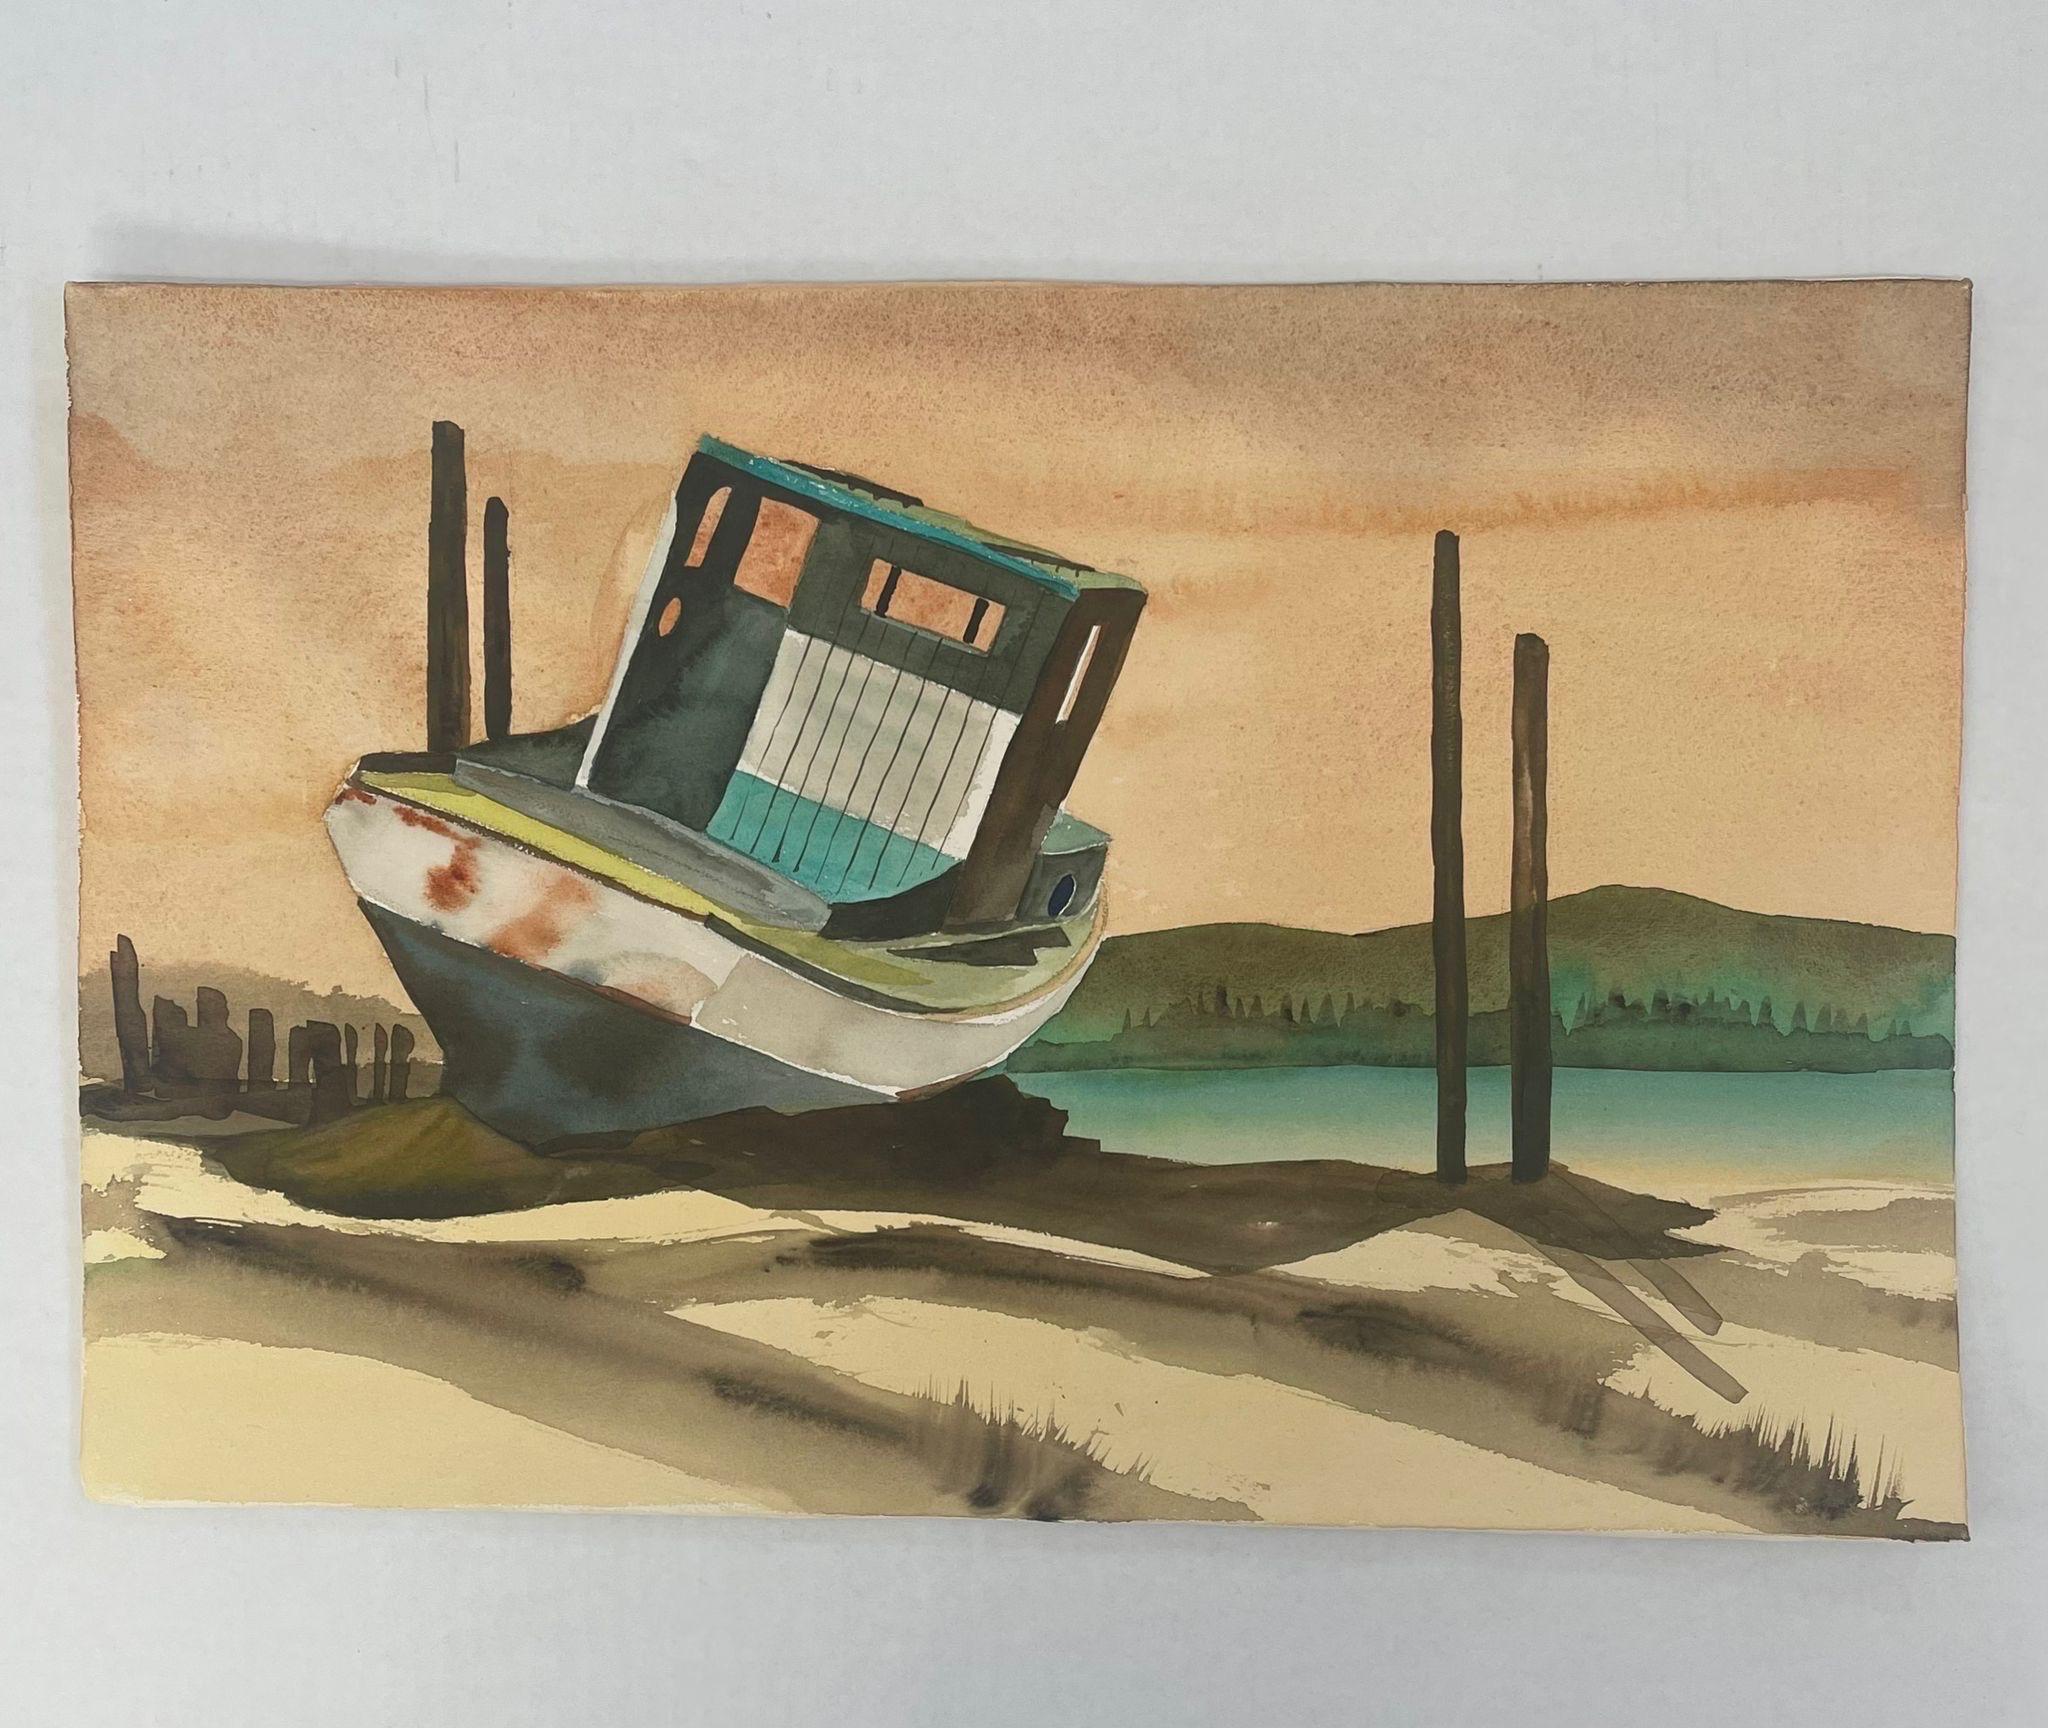 Vintage Artwork of Abstract Landscape Focussing on a Beached Boat. Possibly Watercolor on Paper. Unsigned Original. Vintage Condition Consistent with Age as Pictured.

Dimensions. 20 1/2 W ; 0.12 D ; 13 1/2 H